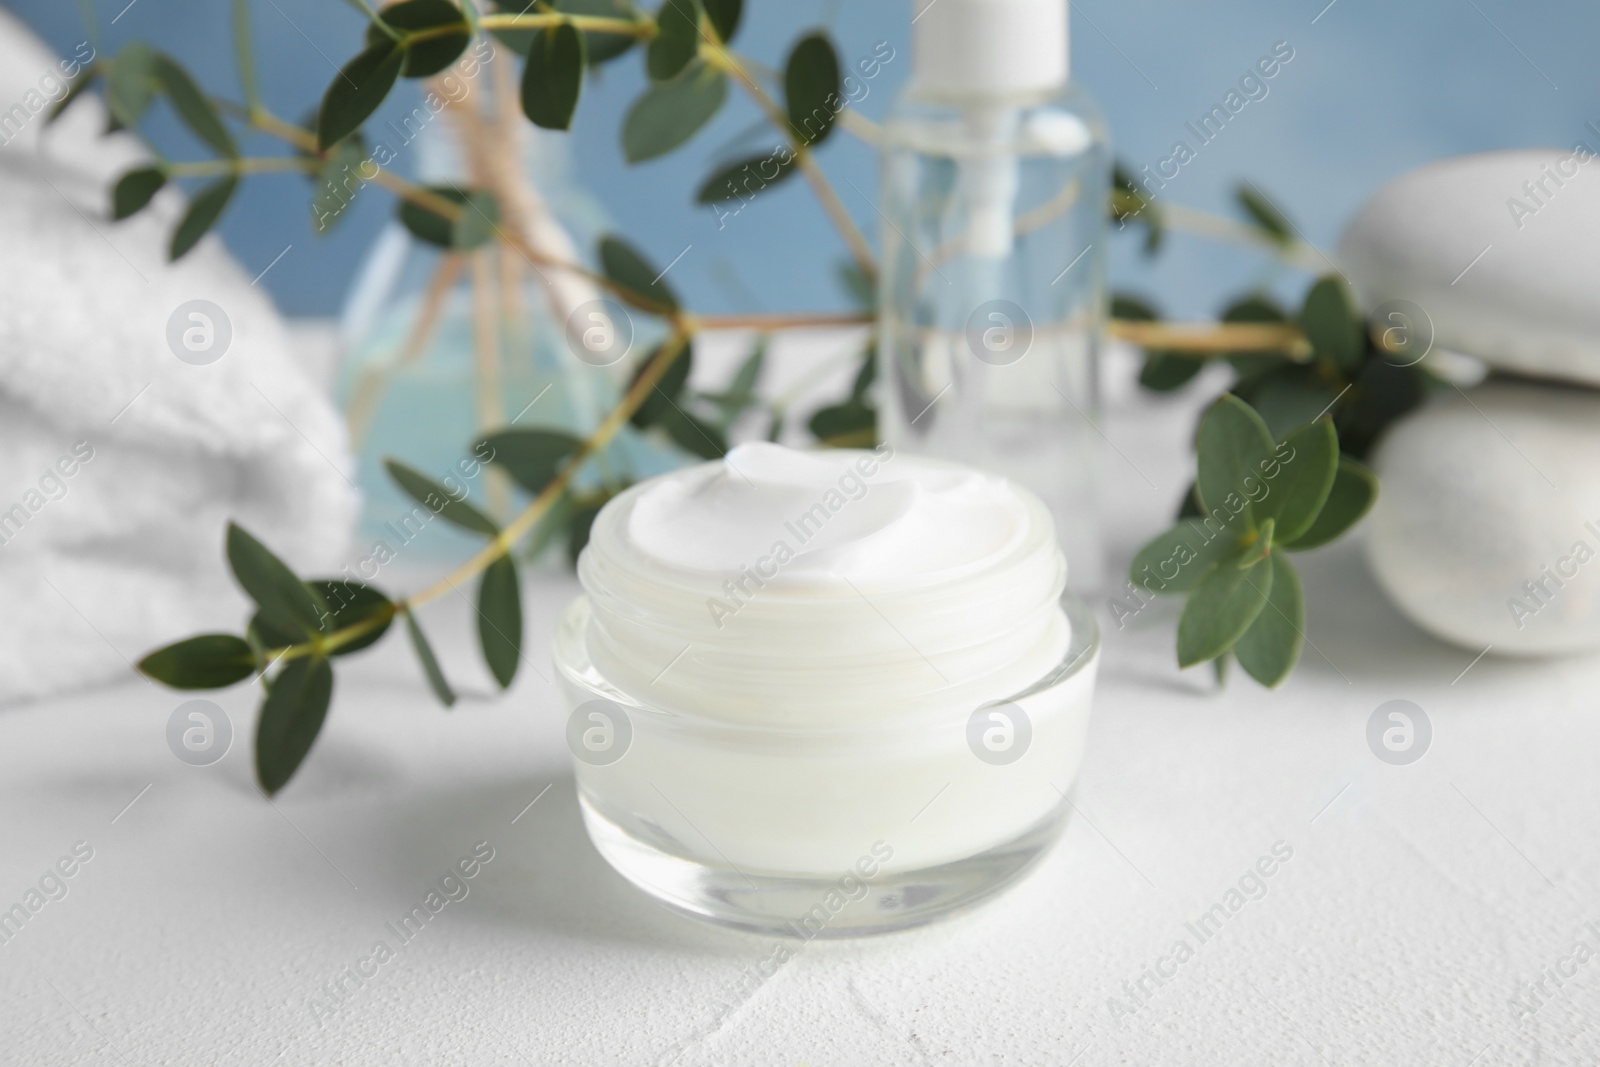 Photo of Jar of body care product on table